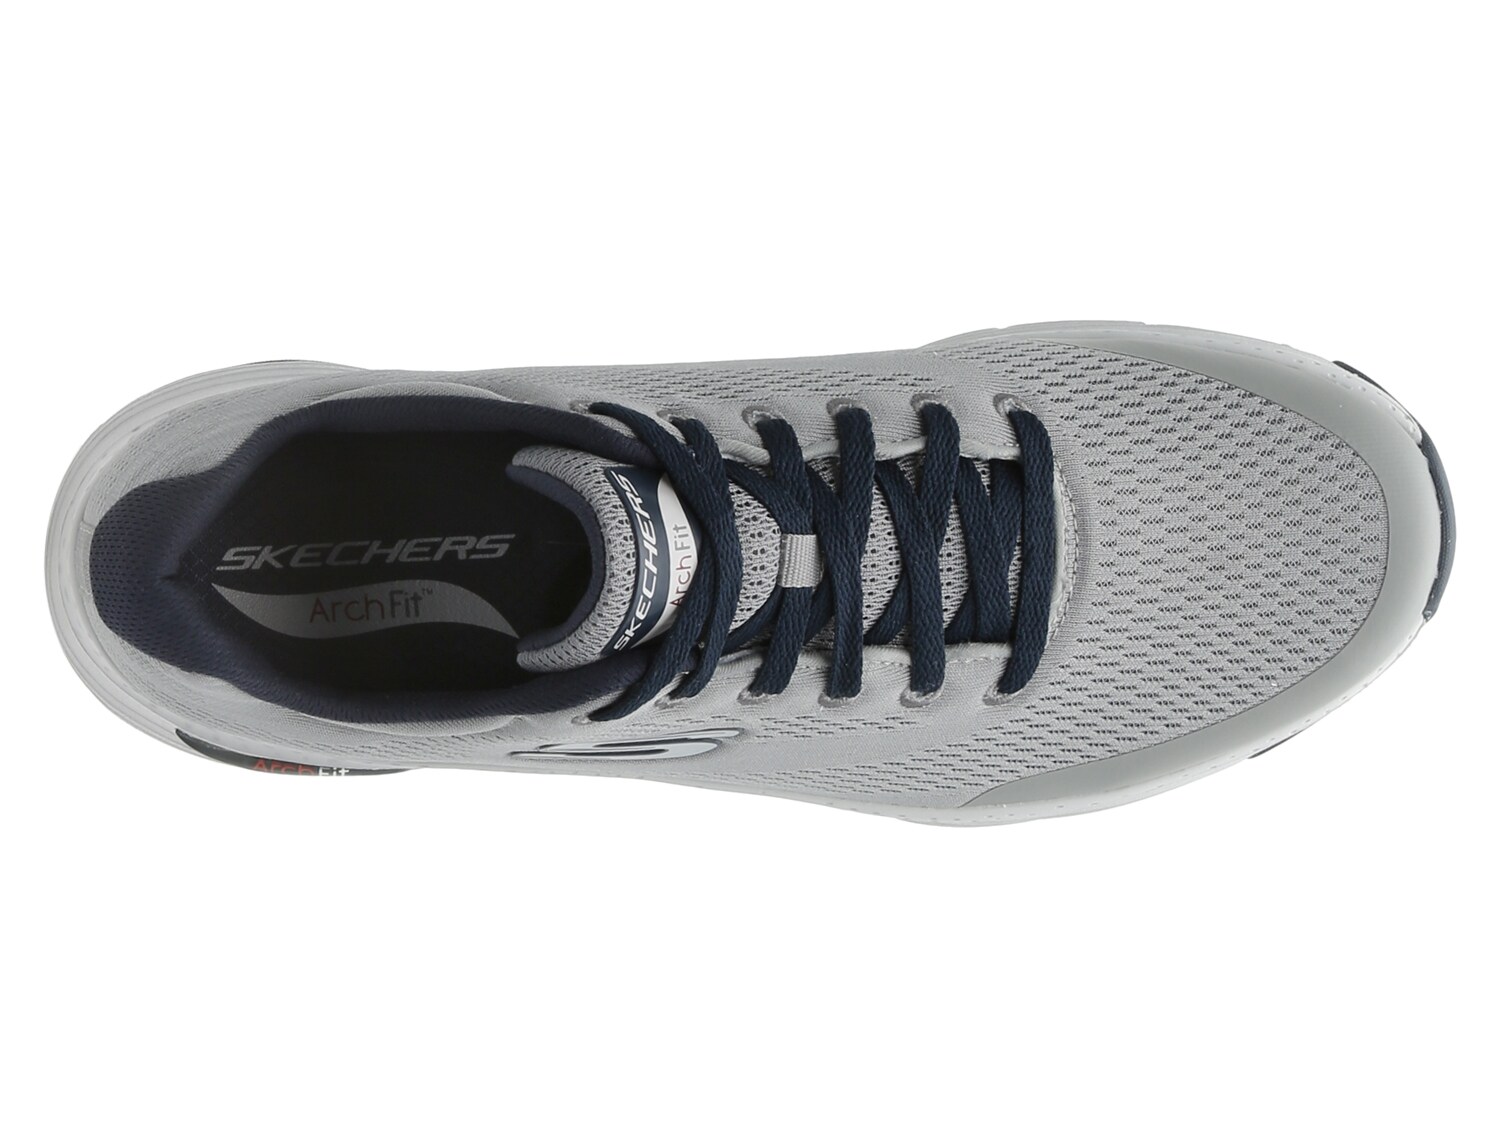 dsw arch support shoes